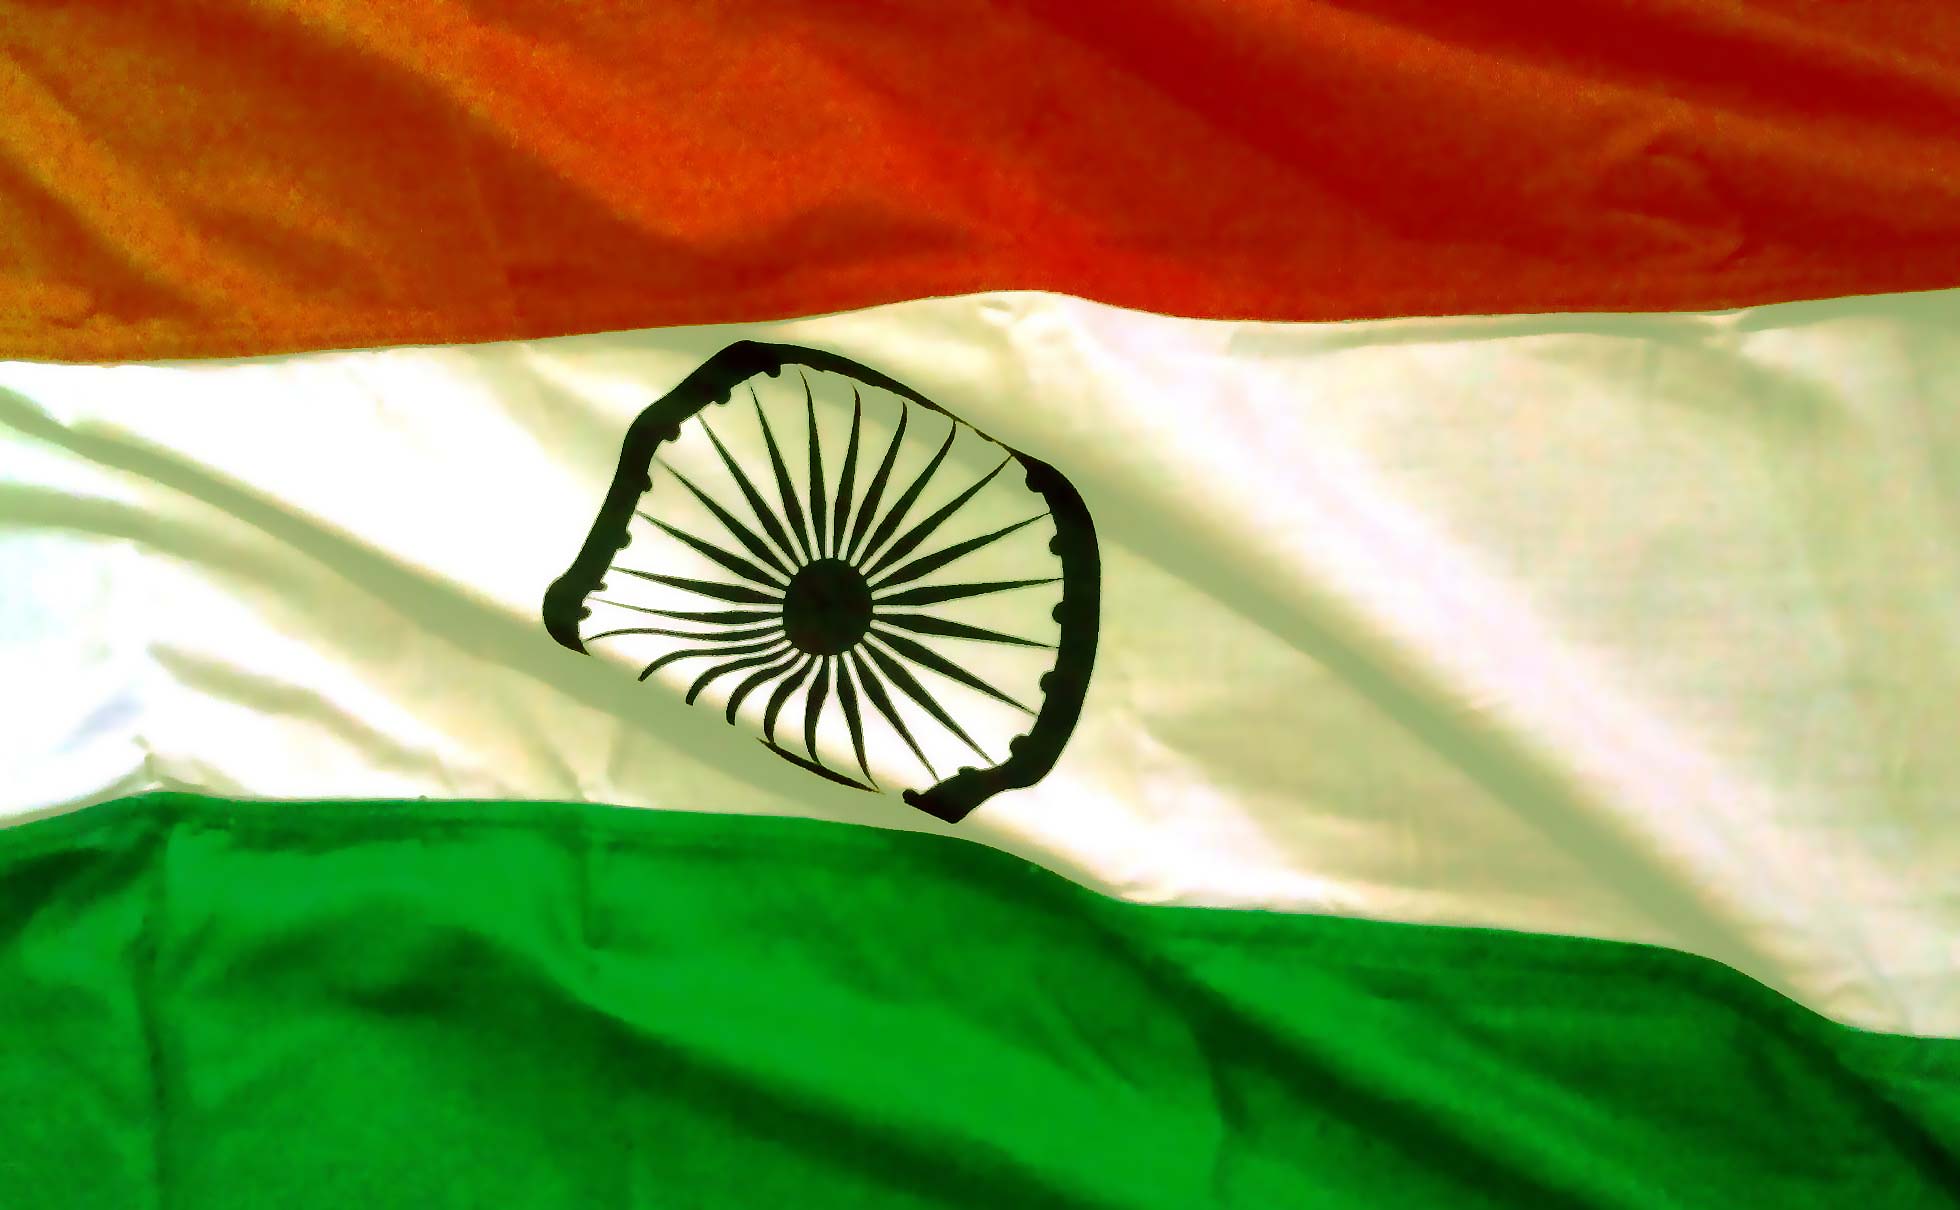 The best Indian flag image ideas